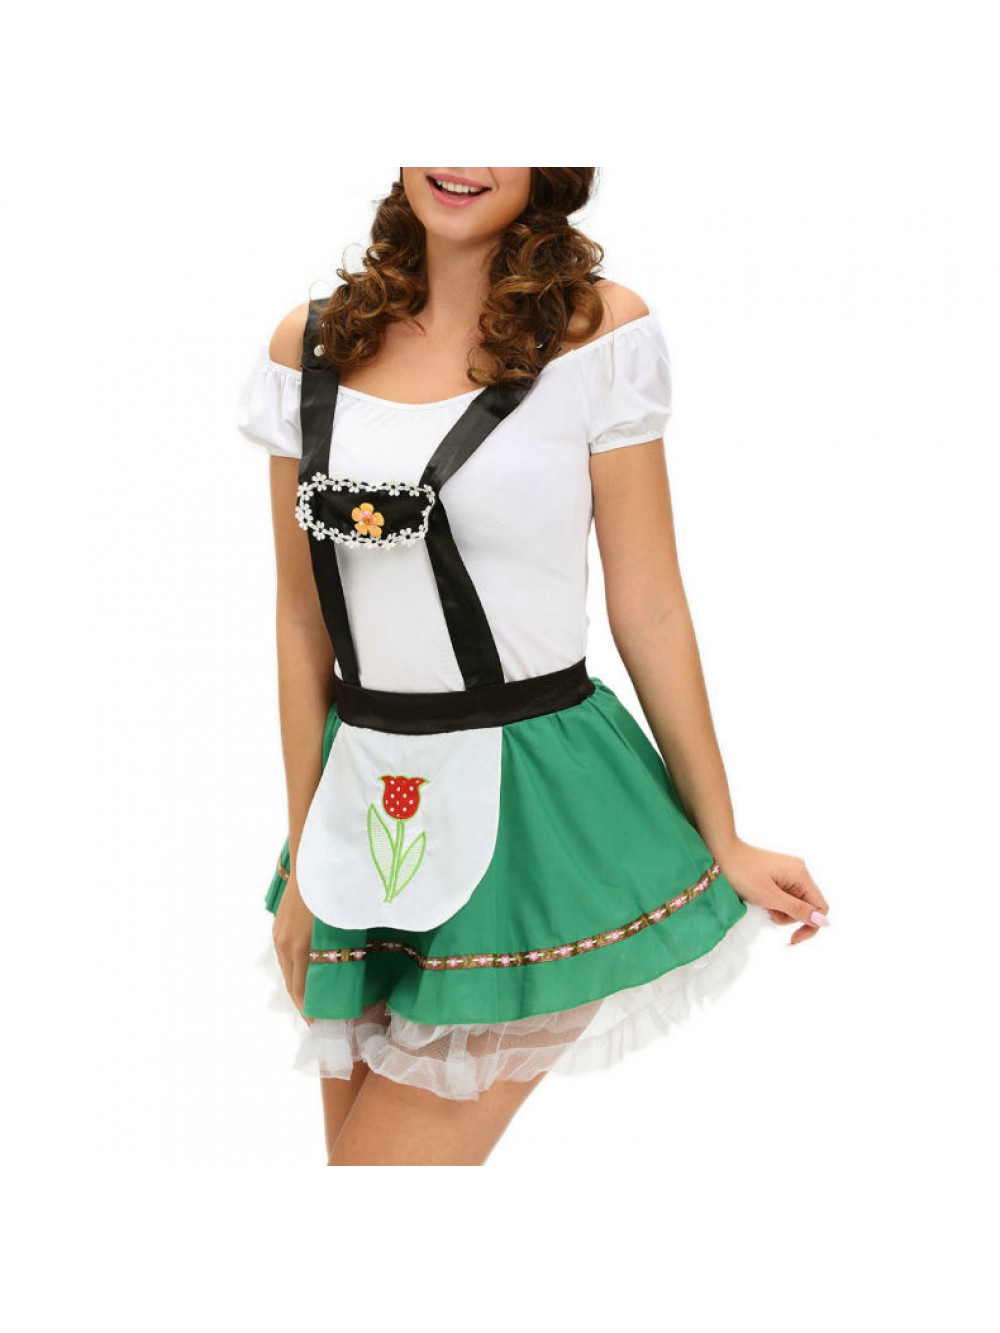 QUEEN COSTUME OCTOBERFEST ONE SIZE 714569772932